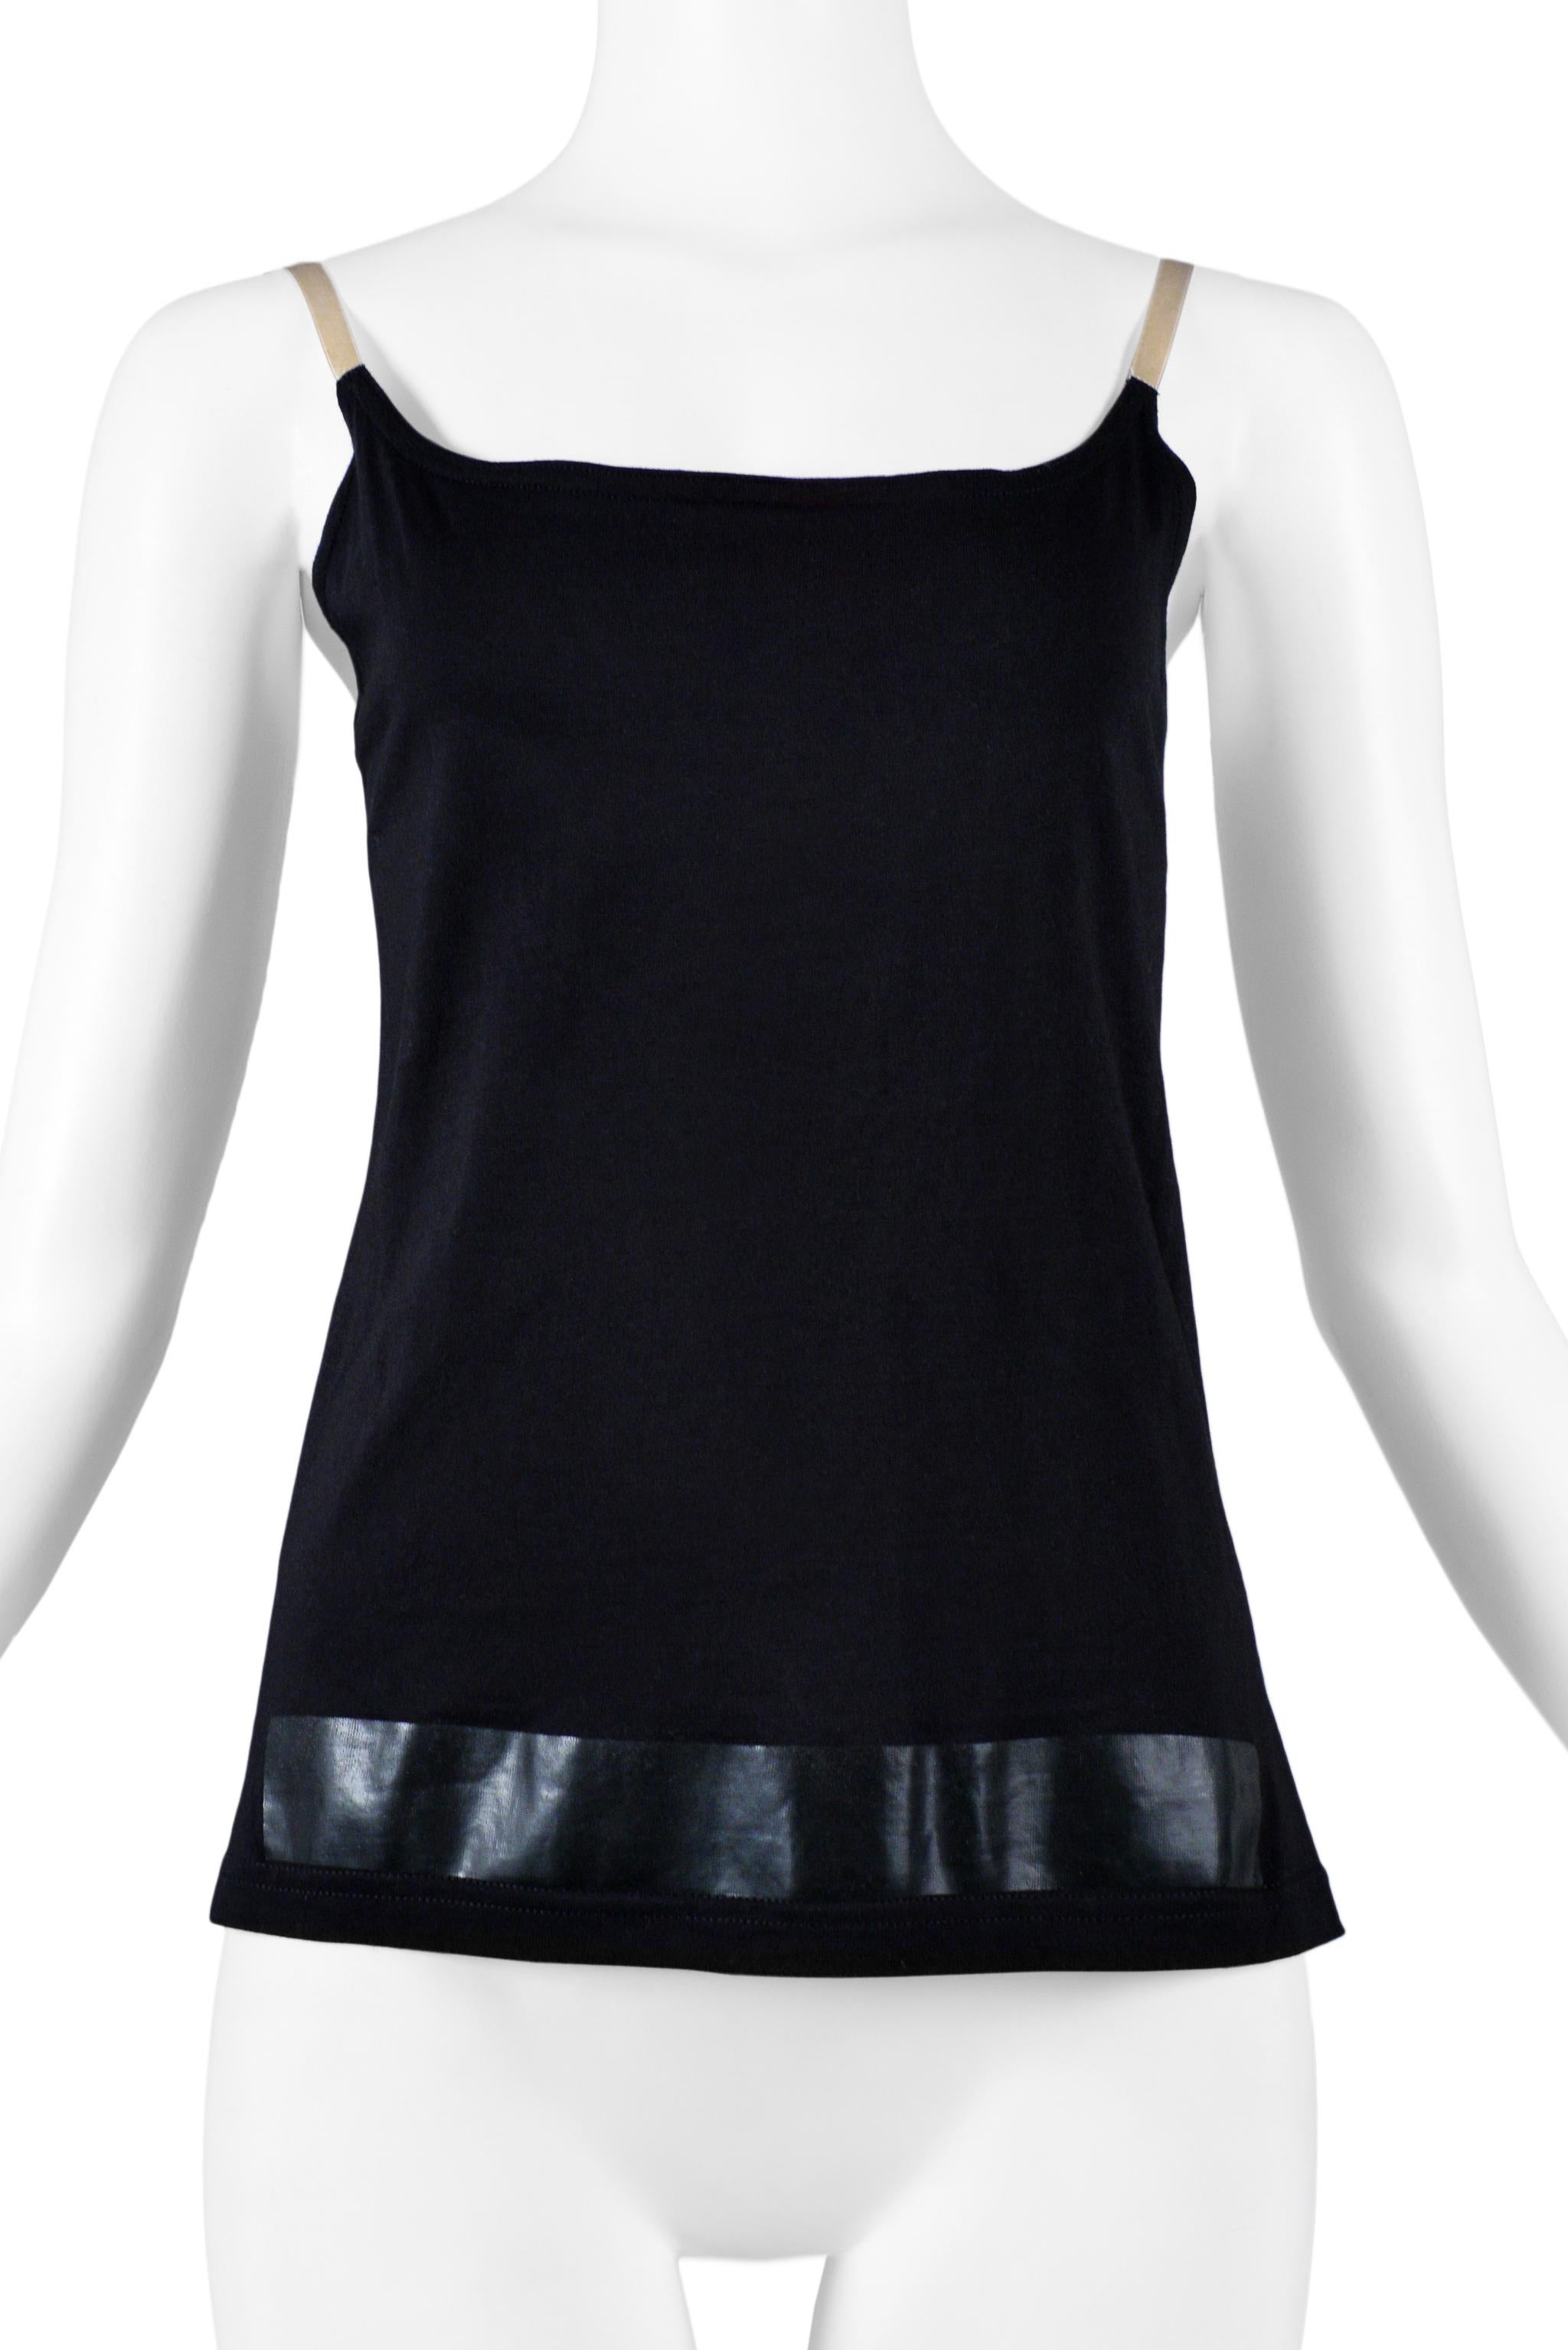 Helmut Lang Black Stripe Tank Top 1996 In Excellent Condition For Sale In Los Angeles, CA